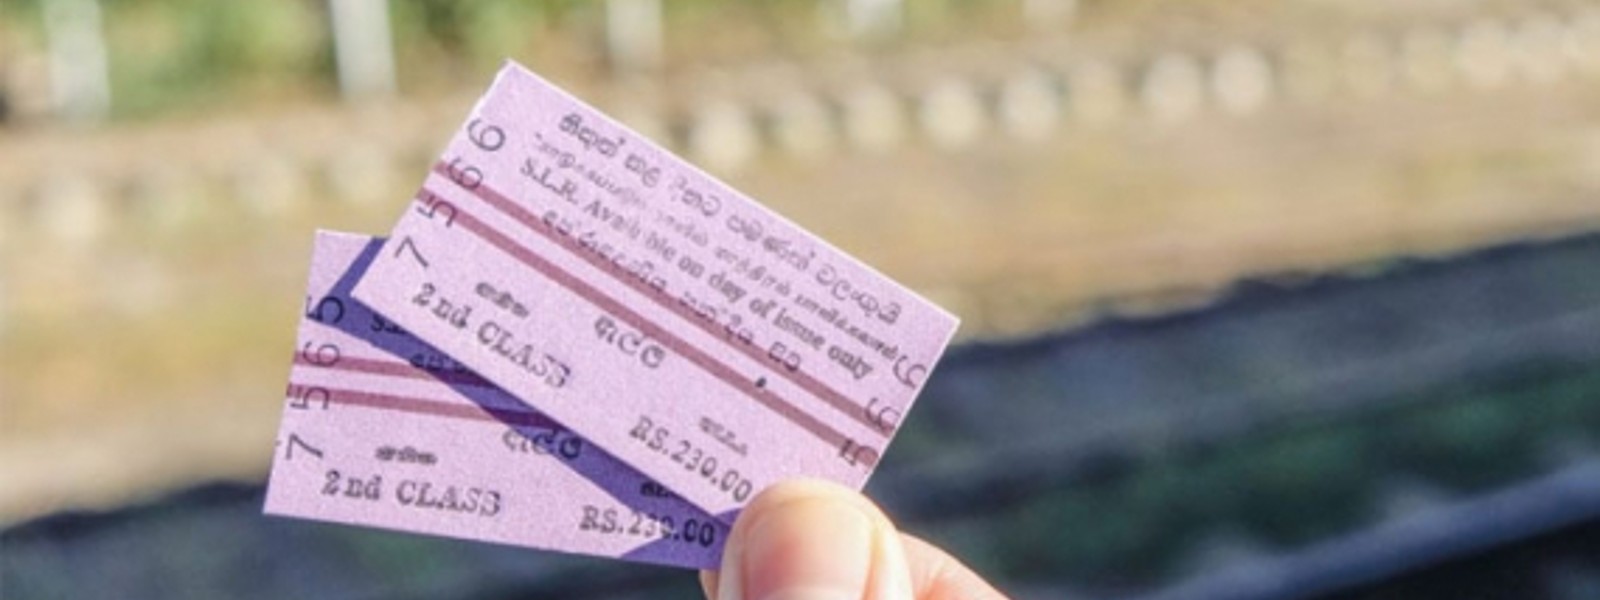 Revised train fares in effect from today (23)